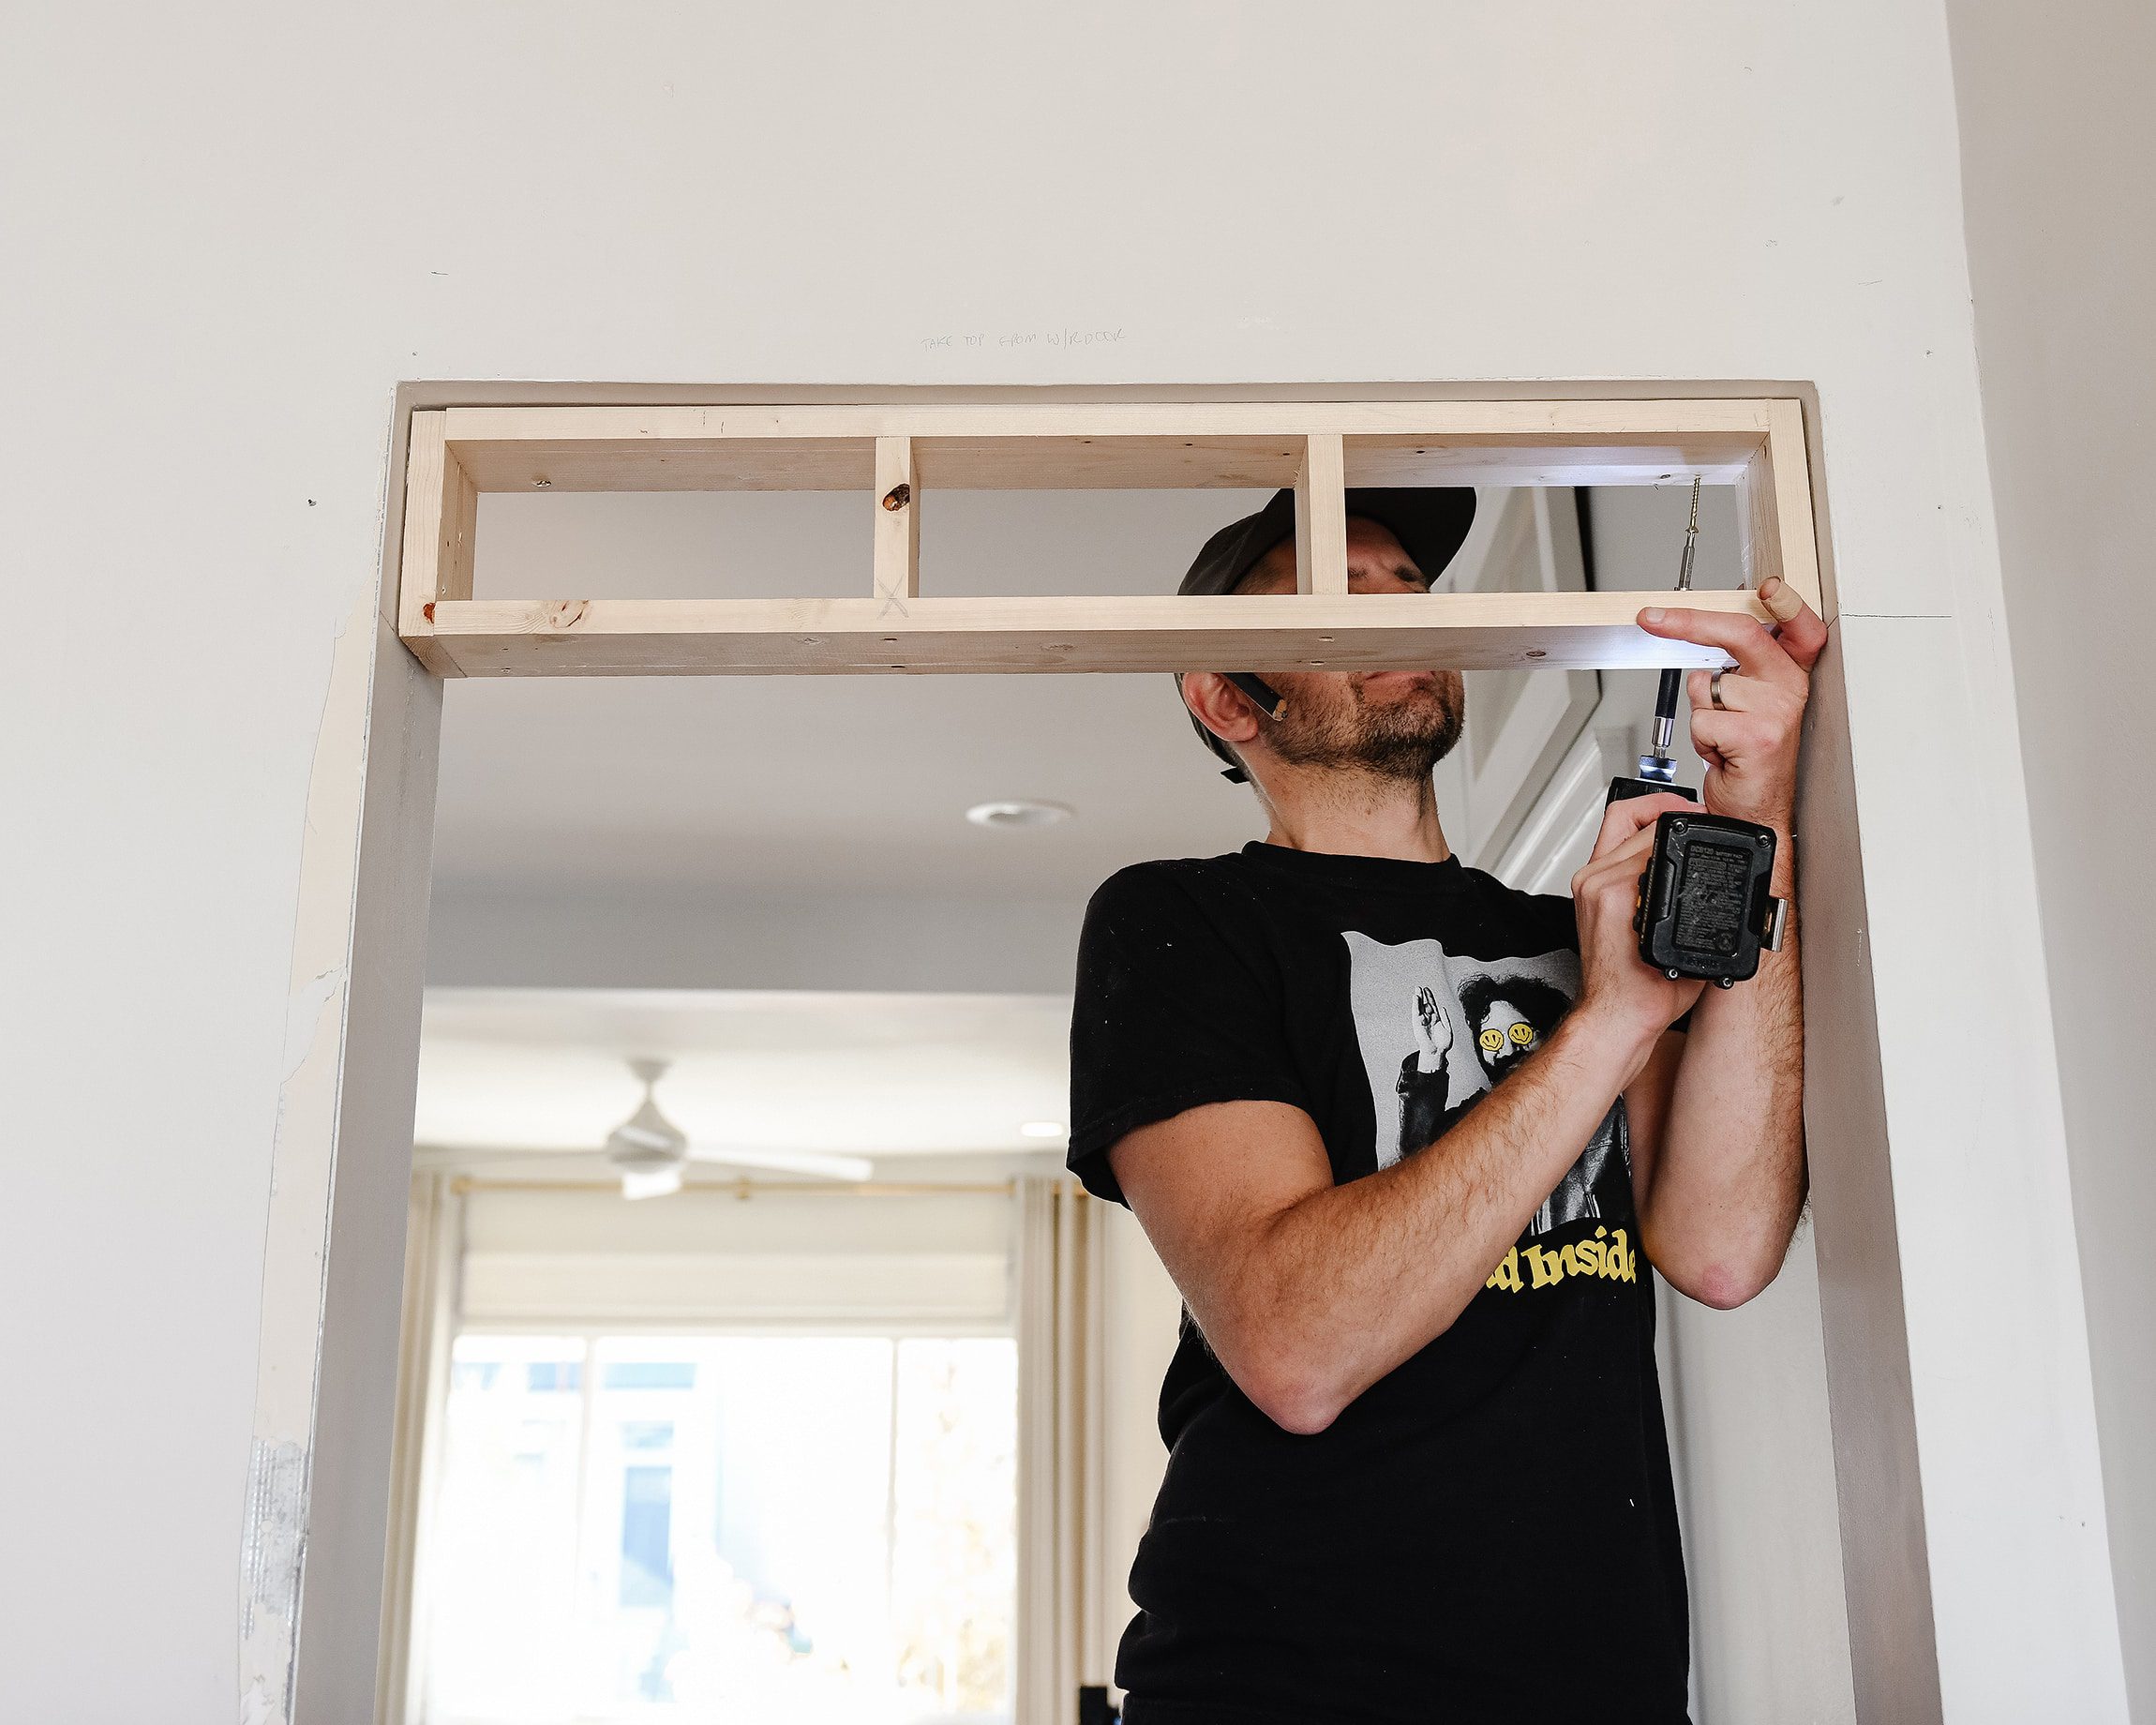 Scott installs a simple box to lower the vertical opening of the door so it lines up with other nearby doors // via yellow brick home